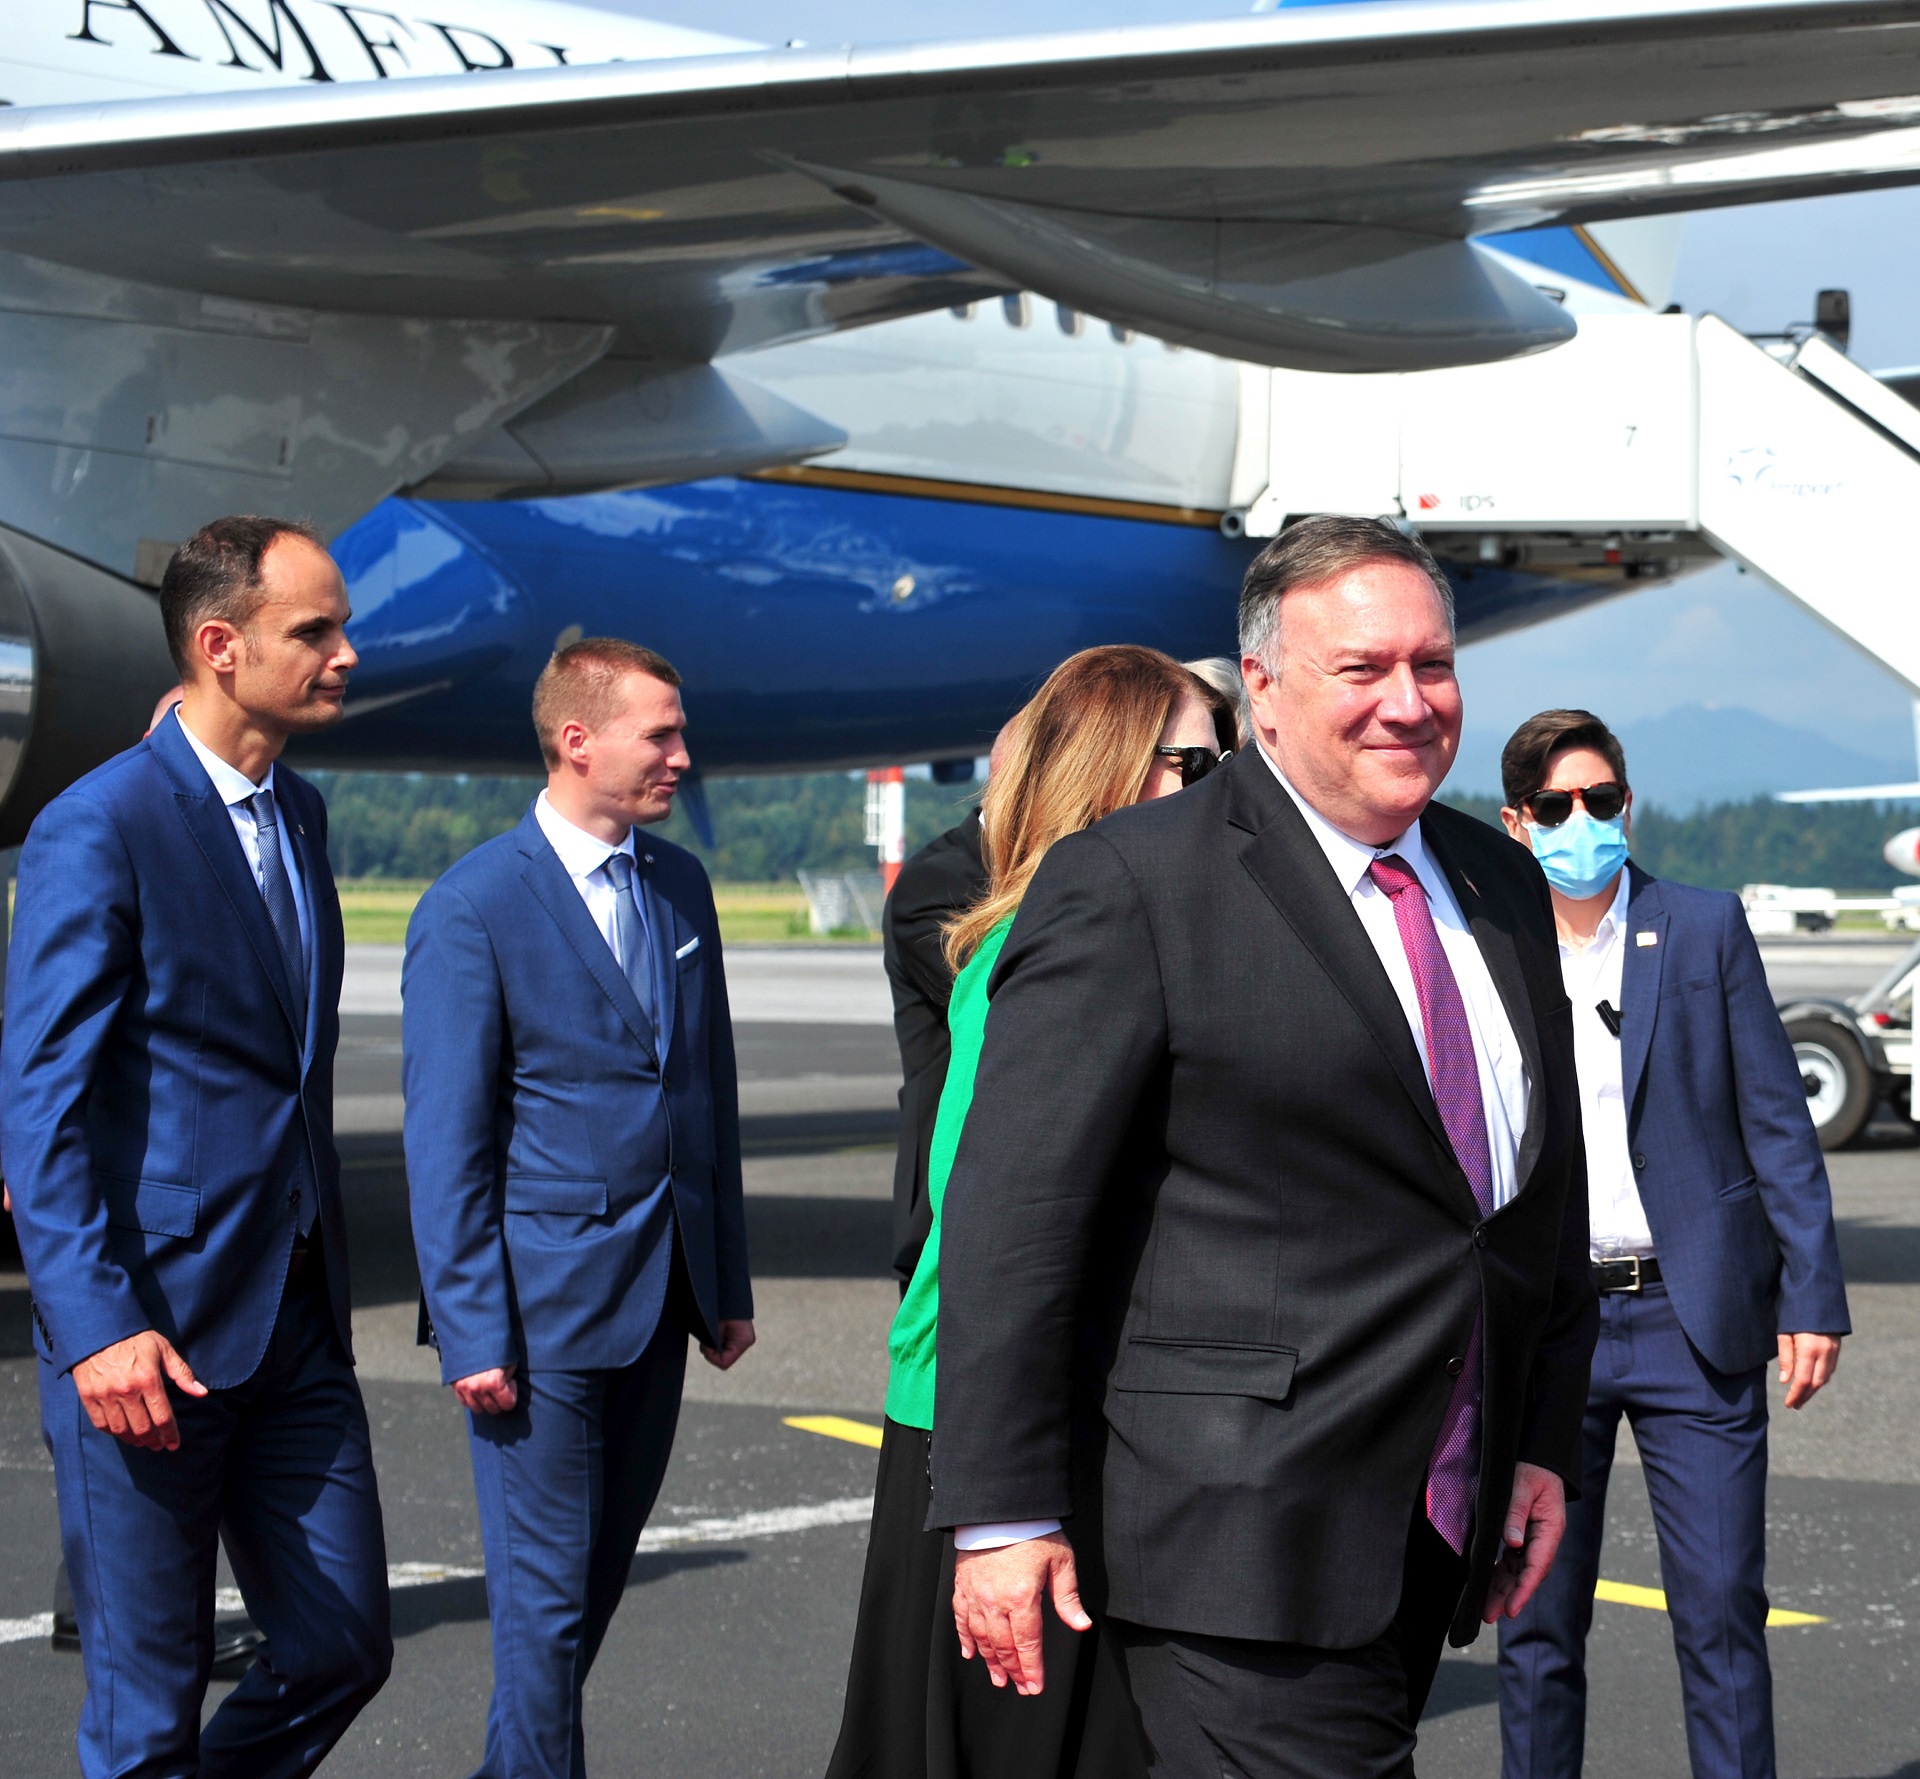 epa08600532 Slovenian Foreign Minister Anze Logar (L) welcomes US State Secretary Mike Pompeo (2-R), at the Joze Pucnik airport in Ljubljana, Slovenia, 13 August 2020. Pompeo is on an official one-day visit to Slovenia, second destination on his tour in four European countries.  EPA/IGOR KUPLJENIK